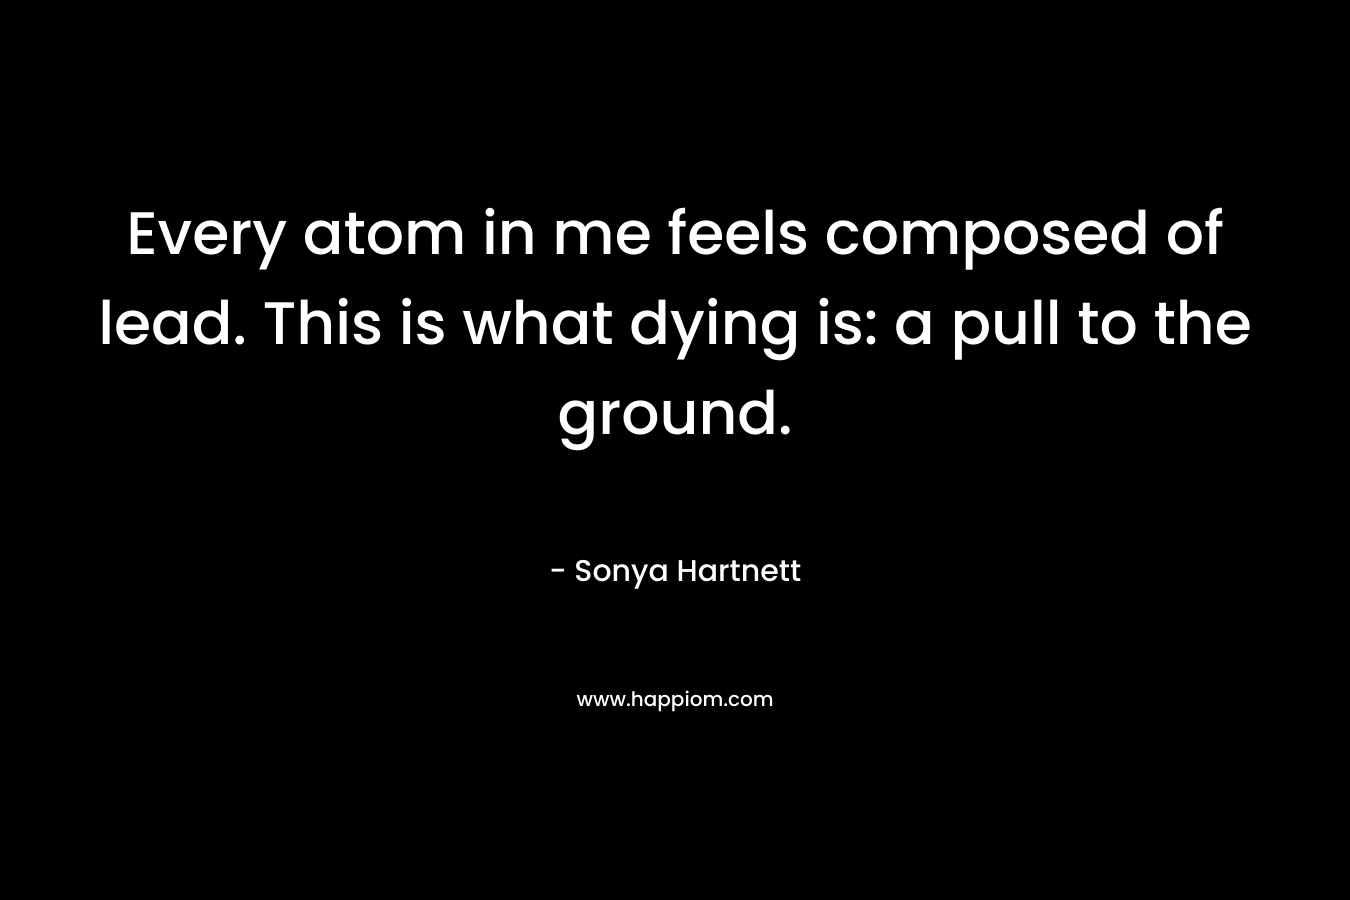 Every atom in me feels composed of lead. This is what dying is: a pull to the ground. – Sonya Hartnett